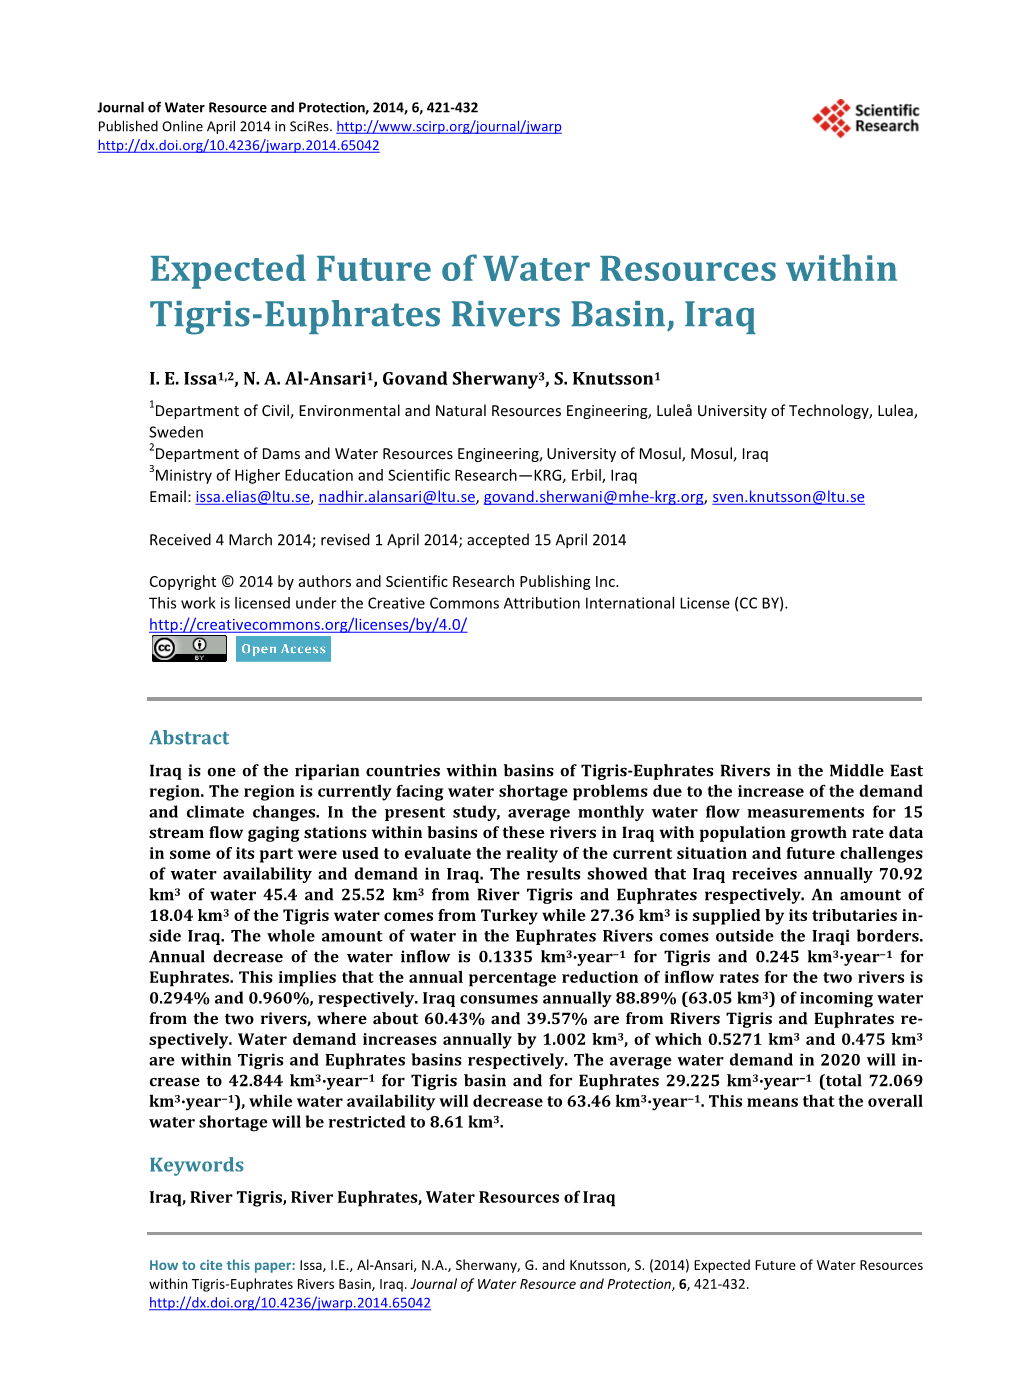 Expected Future of Water Resources Within Tigris-Euphrates Rivers Basin, Iraq